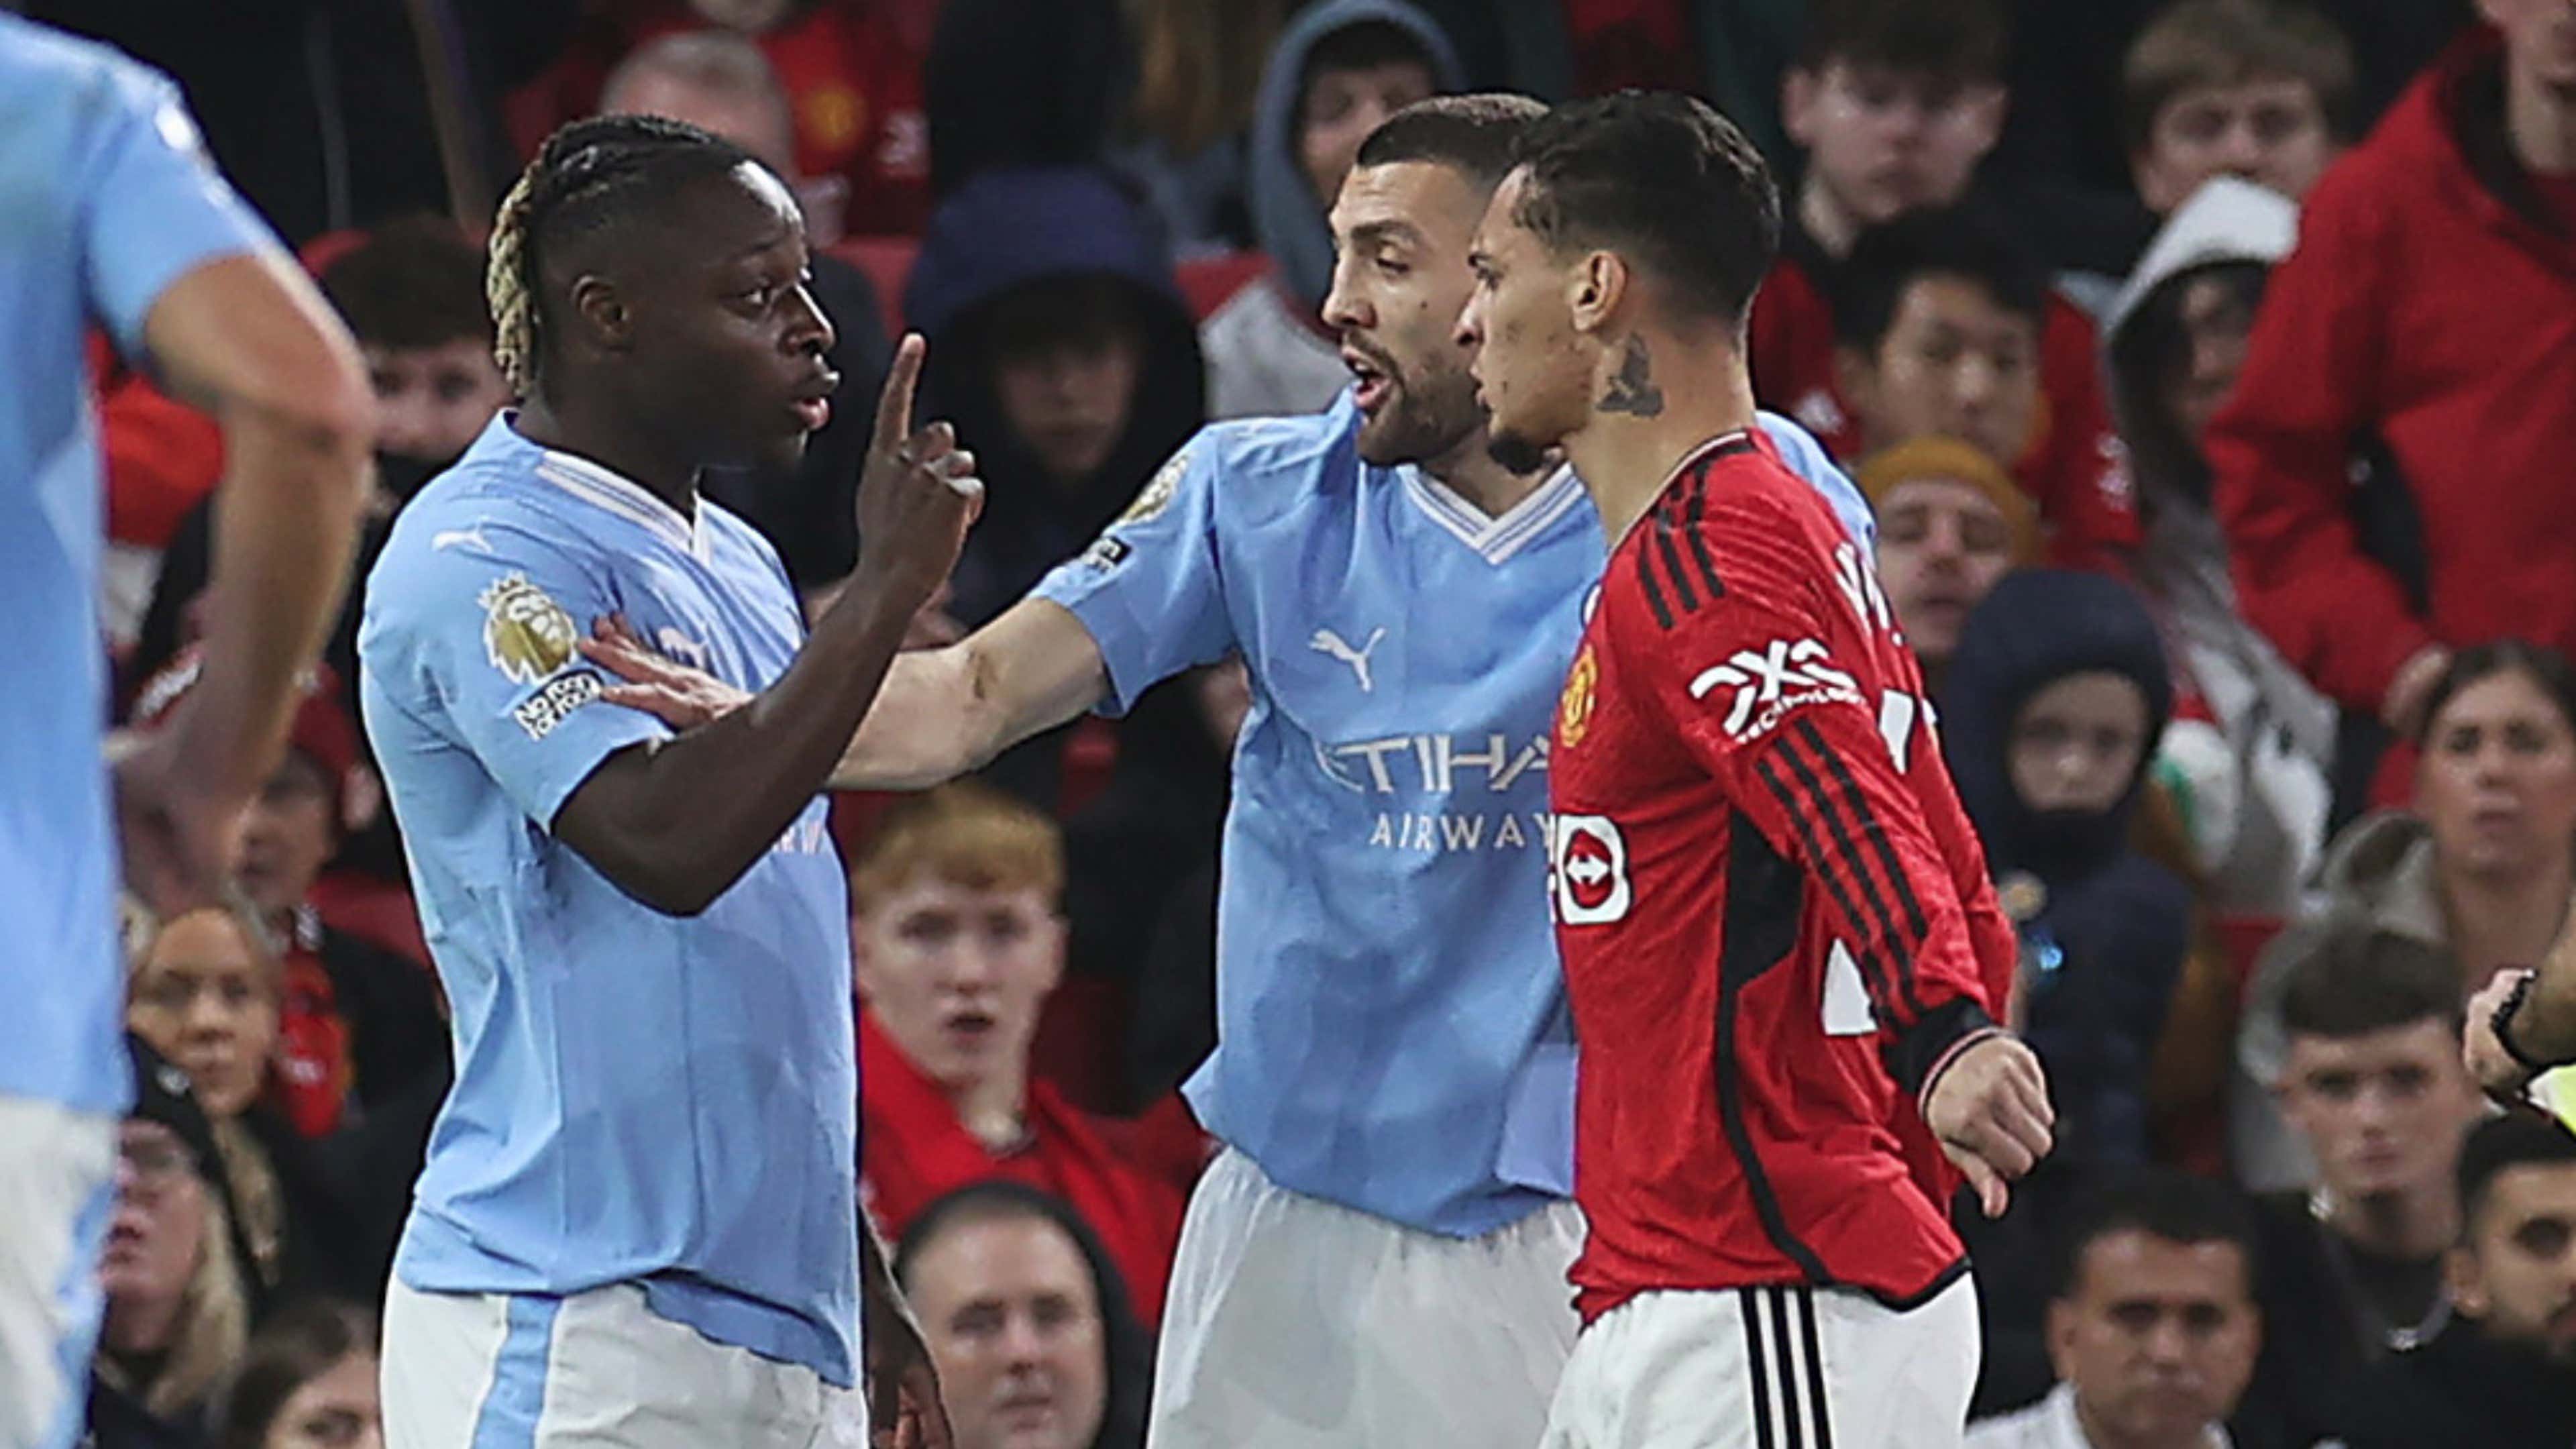 Stay calm' - Man Utd's Antony savagely trolled by City's Jeremy Doku after  heated Manchester derby clash | Goal.com